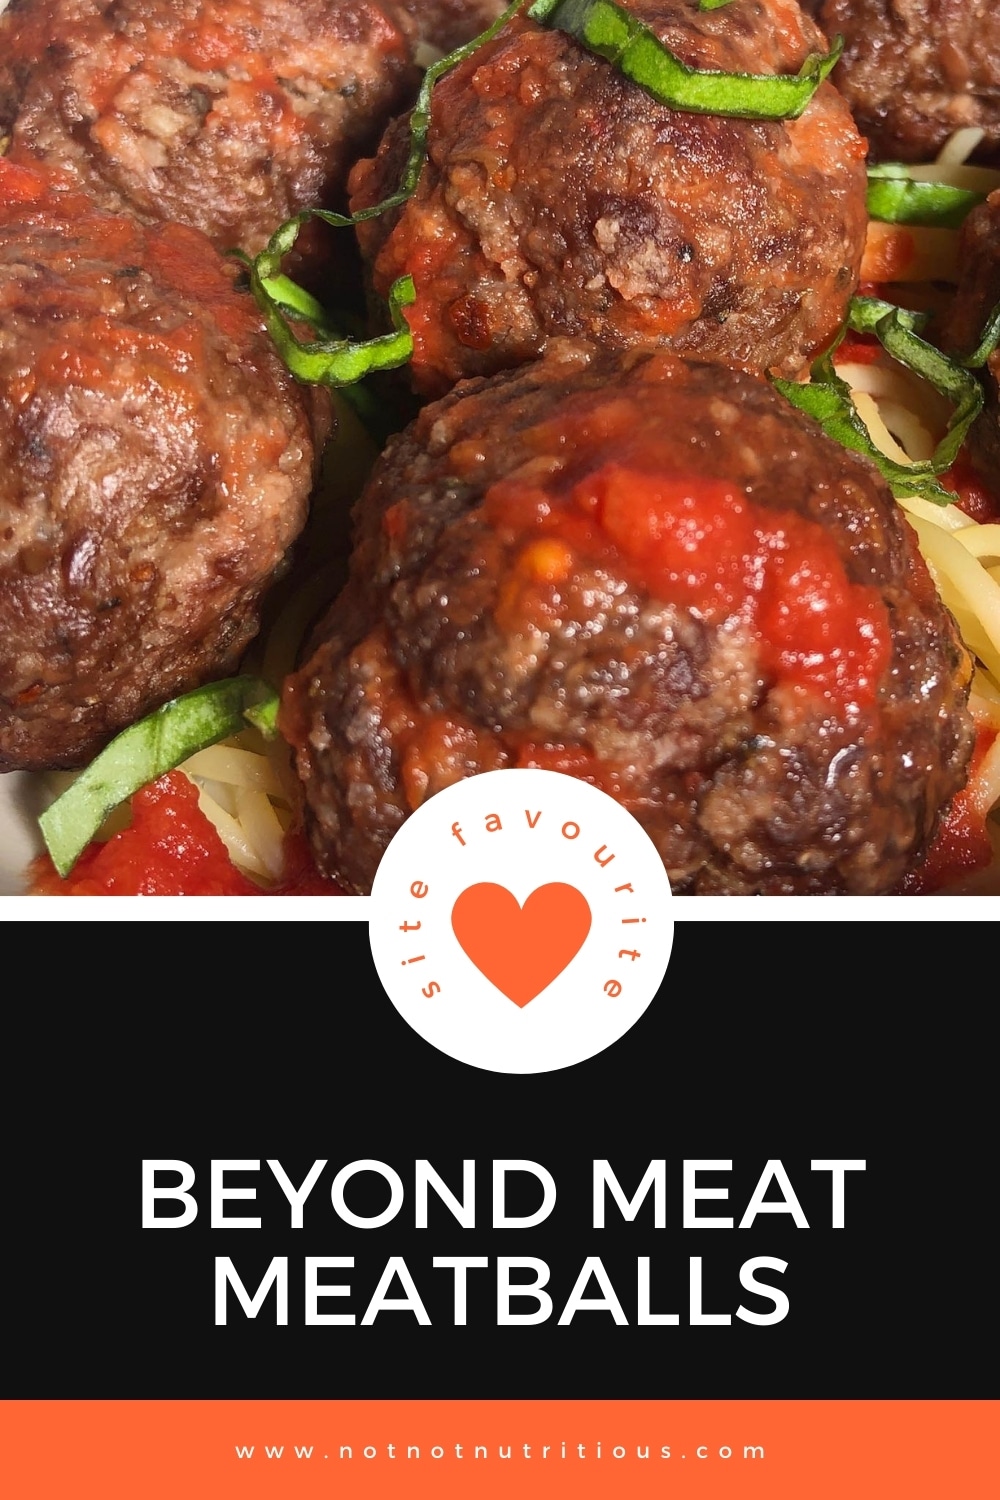 Pin for Beyond Meat Meatballs with close-up view of meatballs